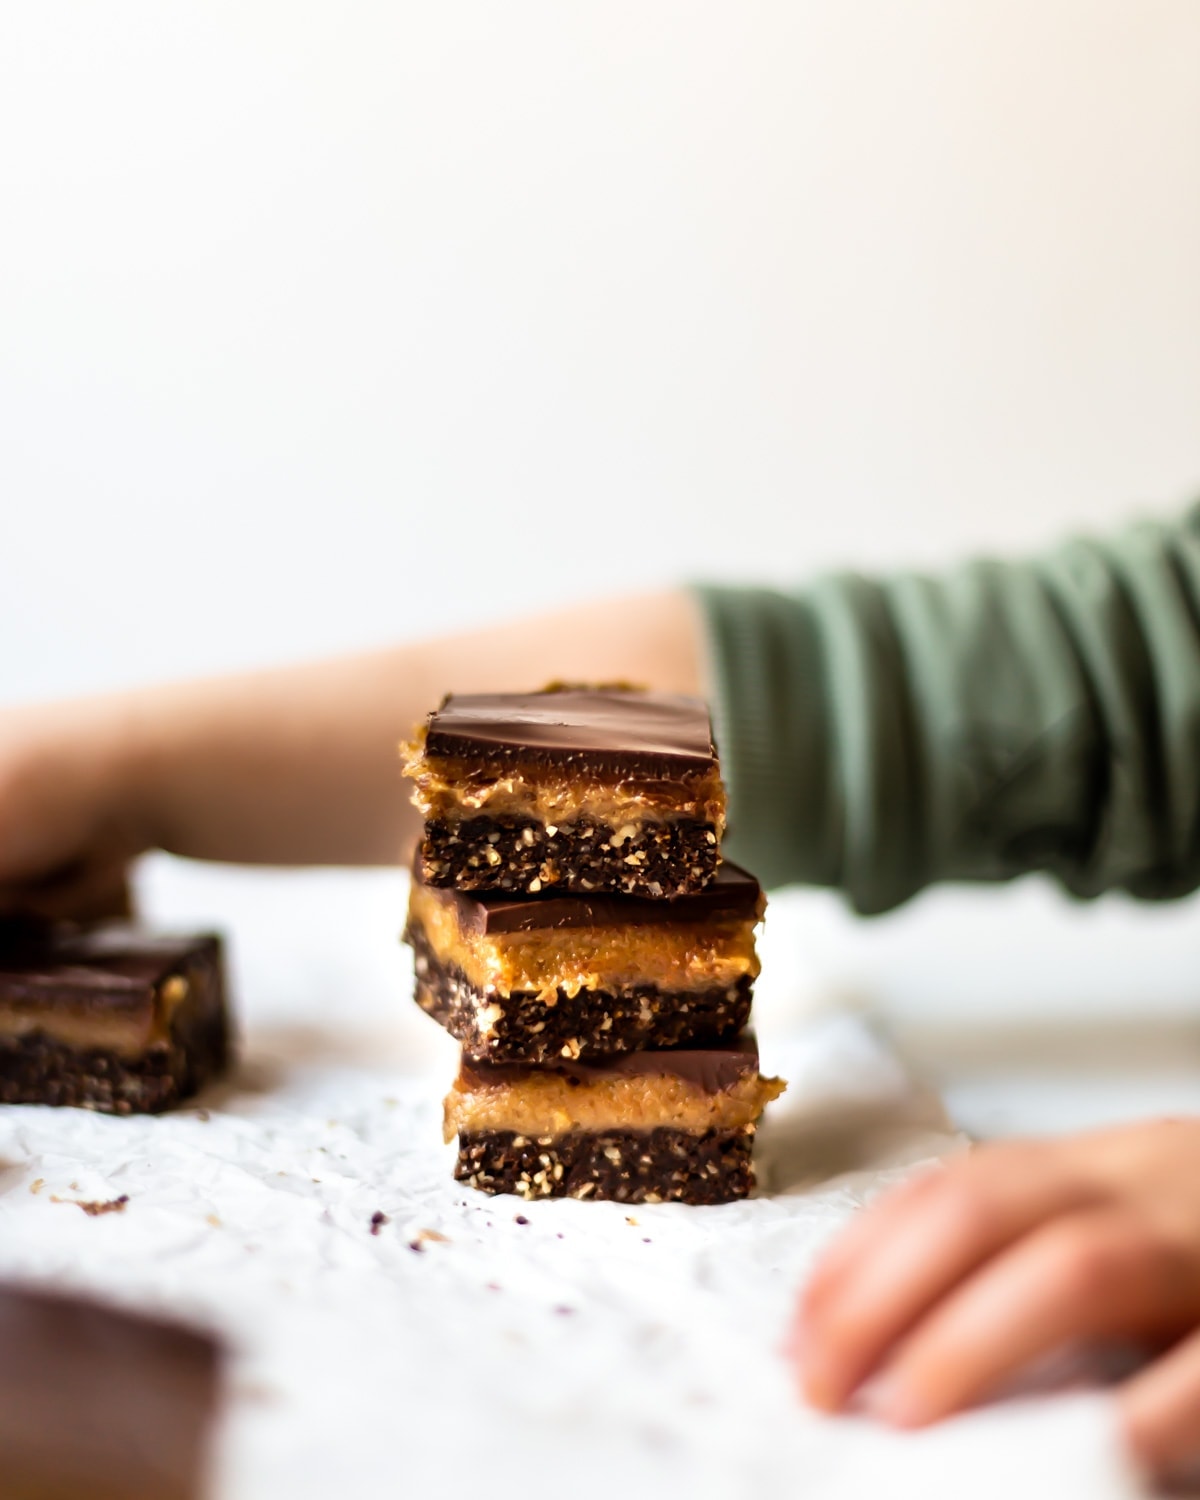 A stack of vegan caramel slices with a toddlers hand in the foreground, about to help himself to one.